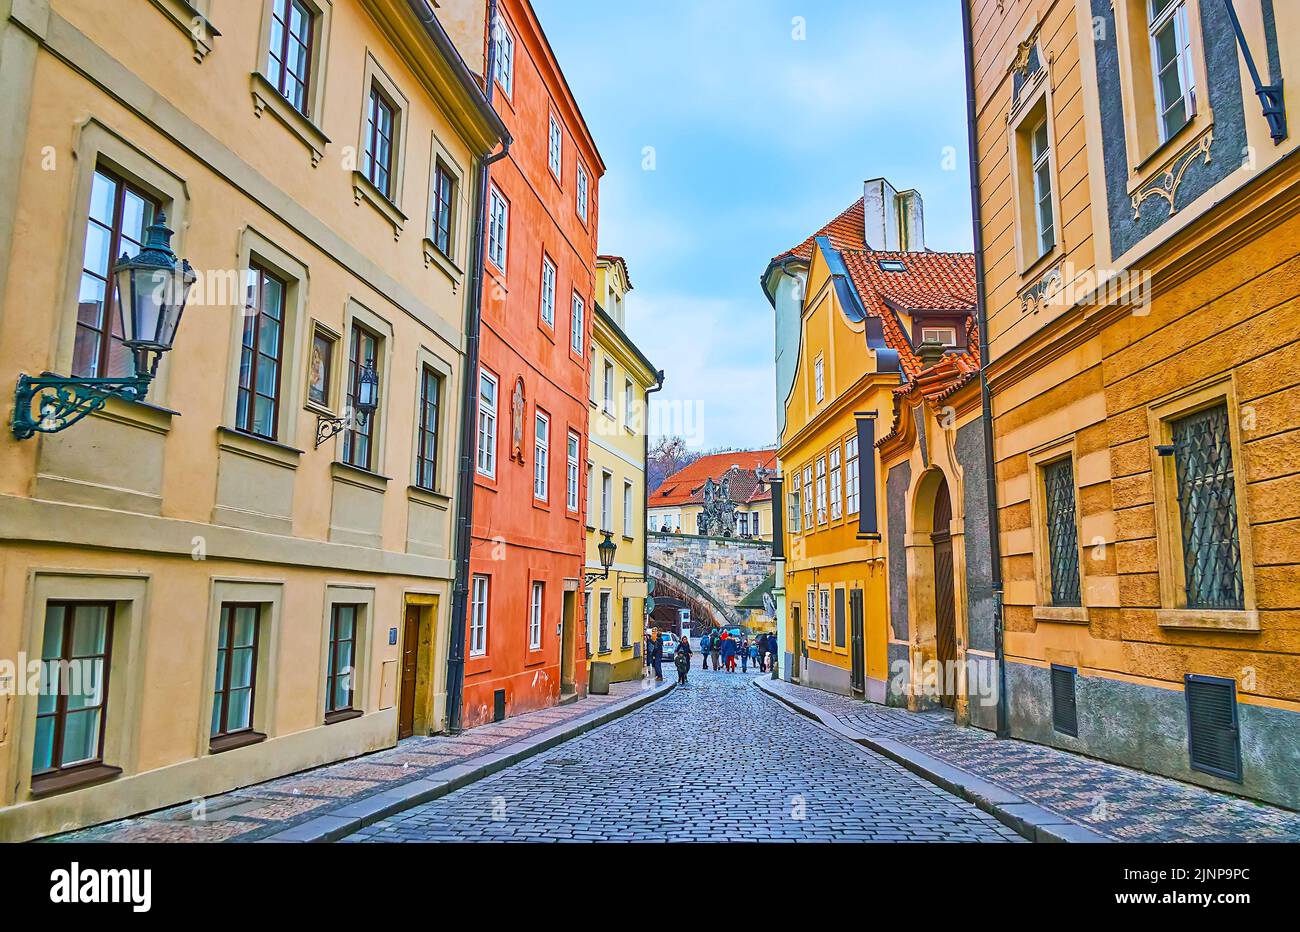 Walk down the narrow street of Mala Strana (Lesser Quarter), lined with beautiful colored houses with museums, restaurants and hotels, Prague, Czech R Stock Photo